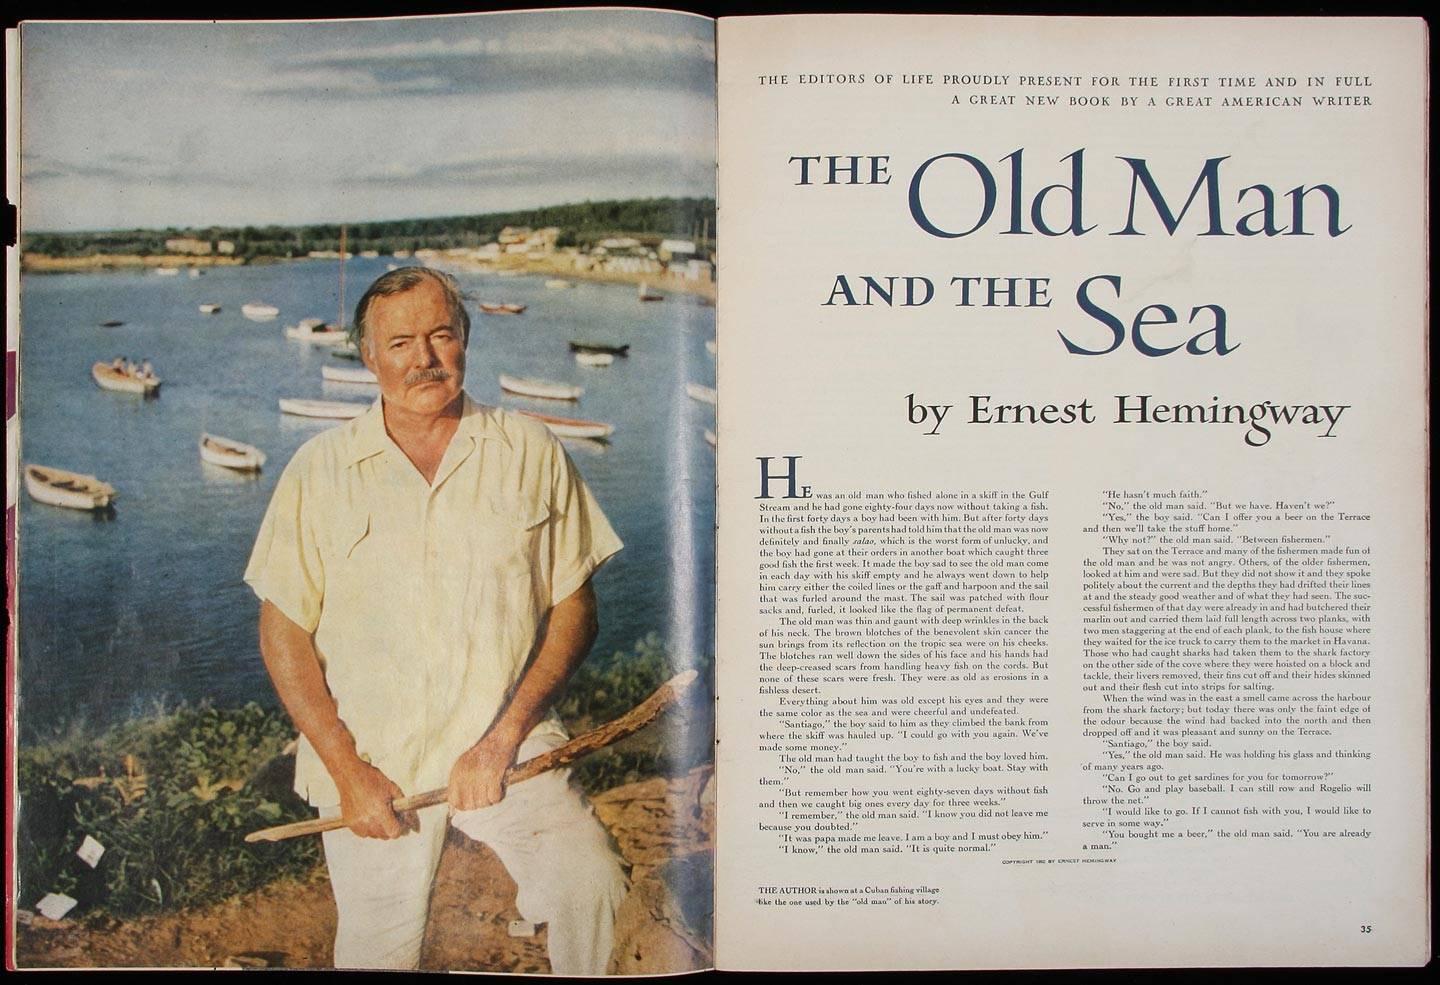 American novelist, Ernest Hemingway is shown left. To the right, the opening page of his Pulitzer Prize-winning novel, The Old Man and the Sea, which was inspired by Bimini, Bahamas